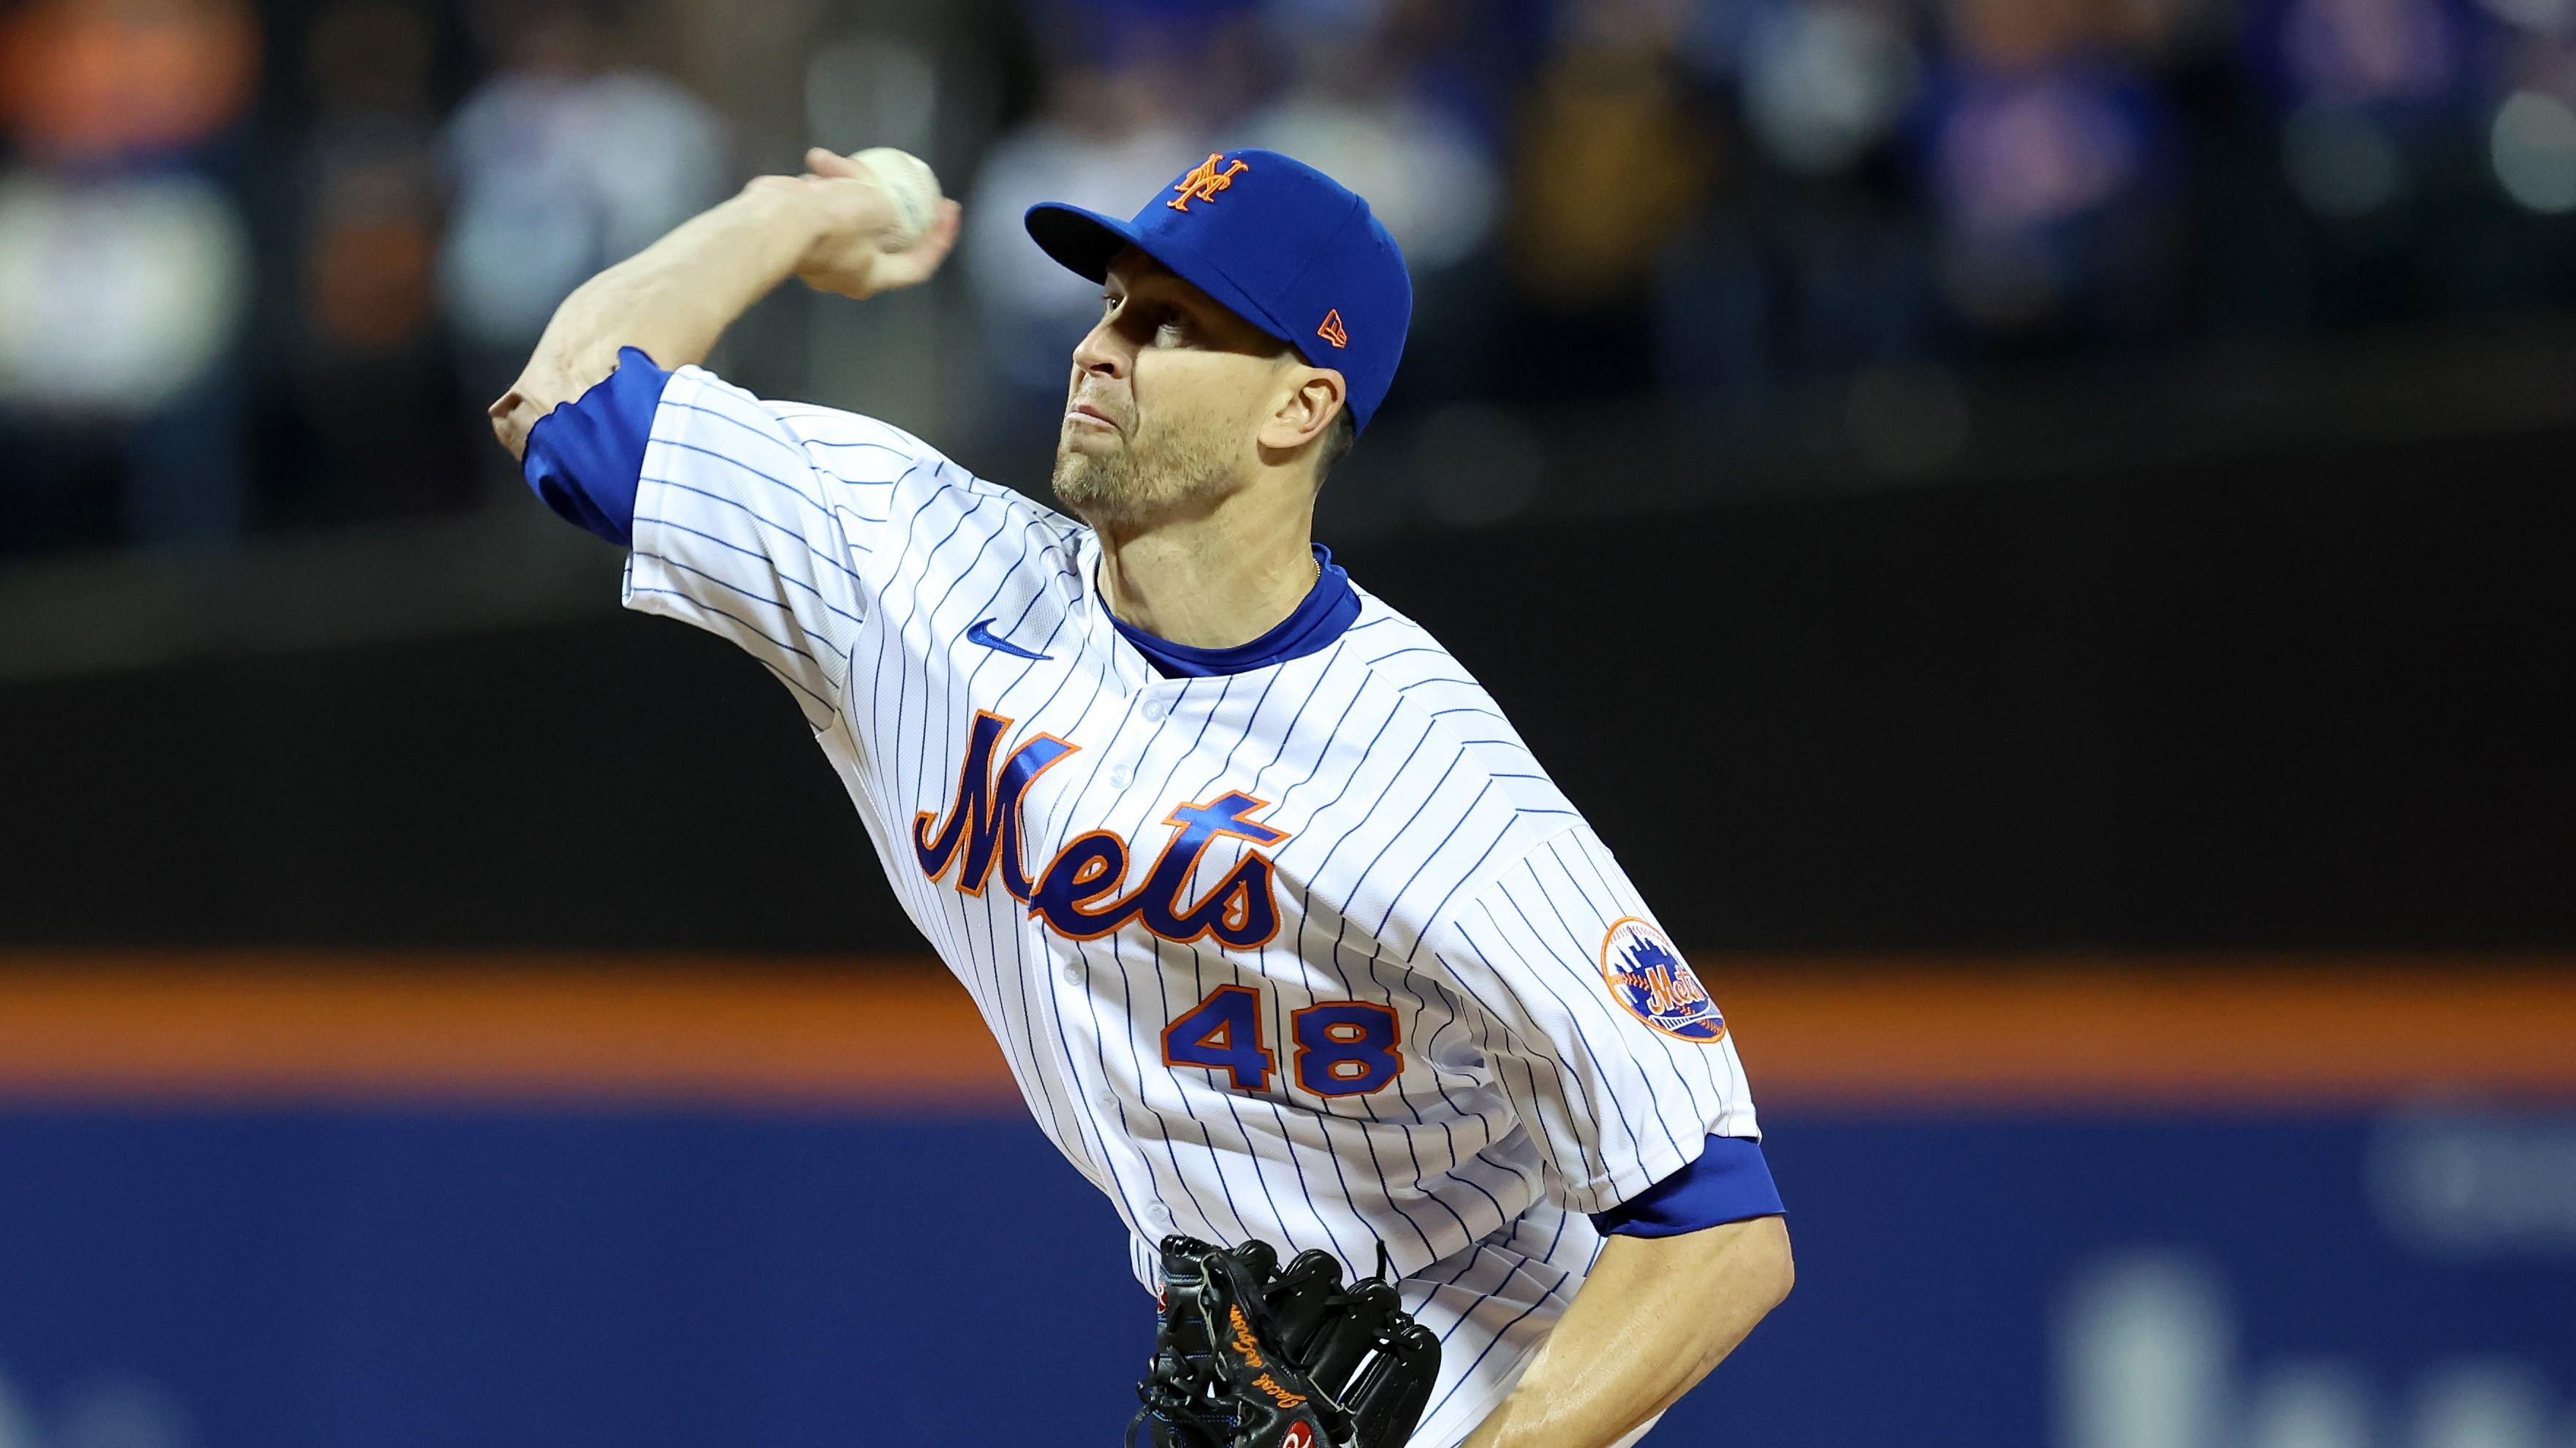 Oct 8, 2022; New York City, New York, USA; New York Mets starting pitcher Jacob deGrom (48) throws a pitch in the first inning during game two of the Wild Card series against the San Diego Padres for the 2022 MLB Playoffs at Citi Field. Mandatory Credit: Mike Dinovo-USA TODAY Sports / © Mike Dinovo-USA TODAY Sports